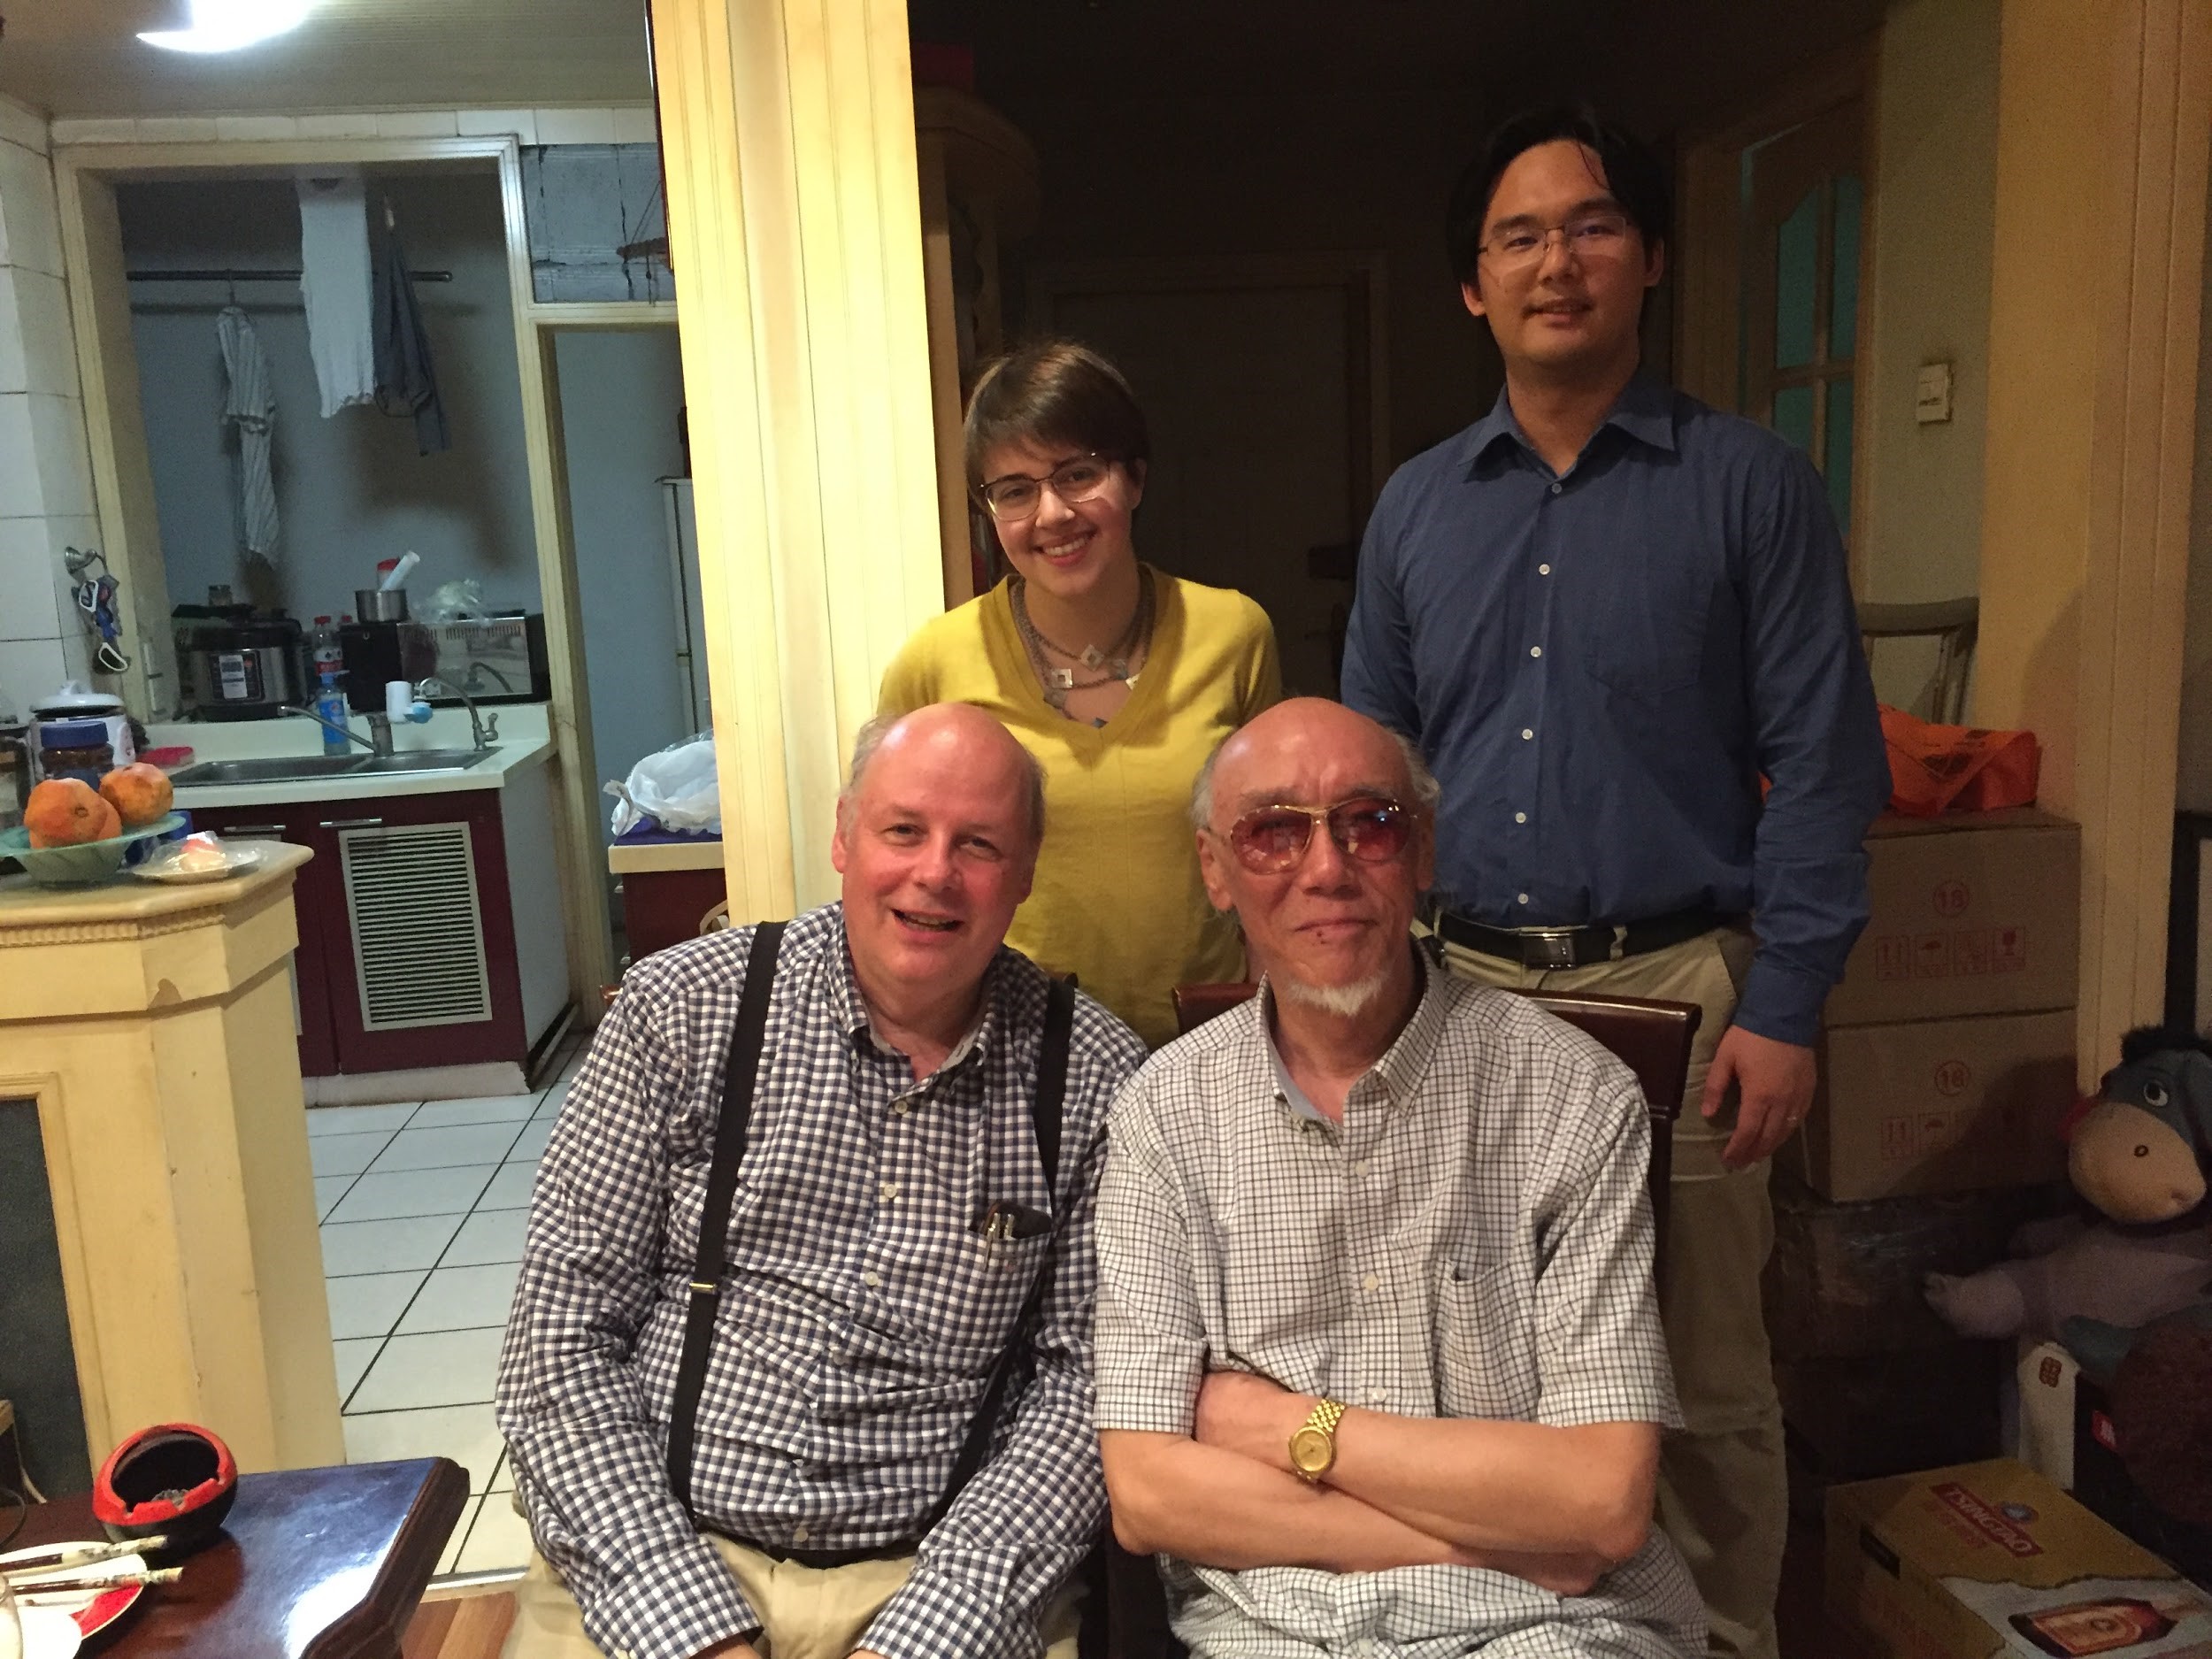 After a dinner at Gao Weijie’s house in September 2017 with Gao Weijie, Gao Ping (photographer), Dutch ethnomusicologist Frank Kouwenhoven, and lawyer Wang Teng.